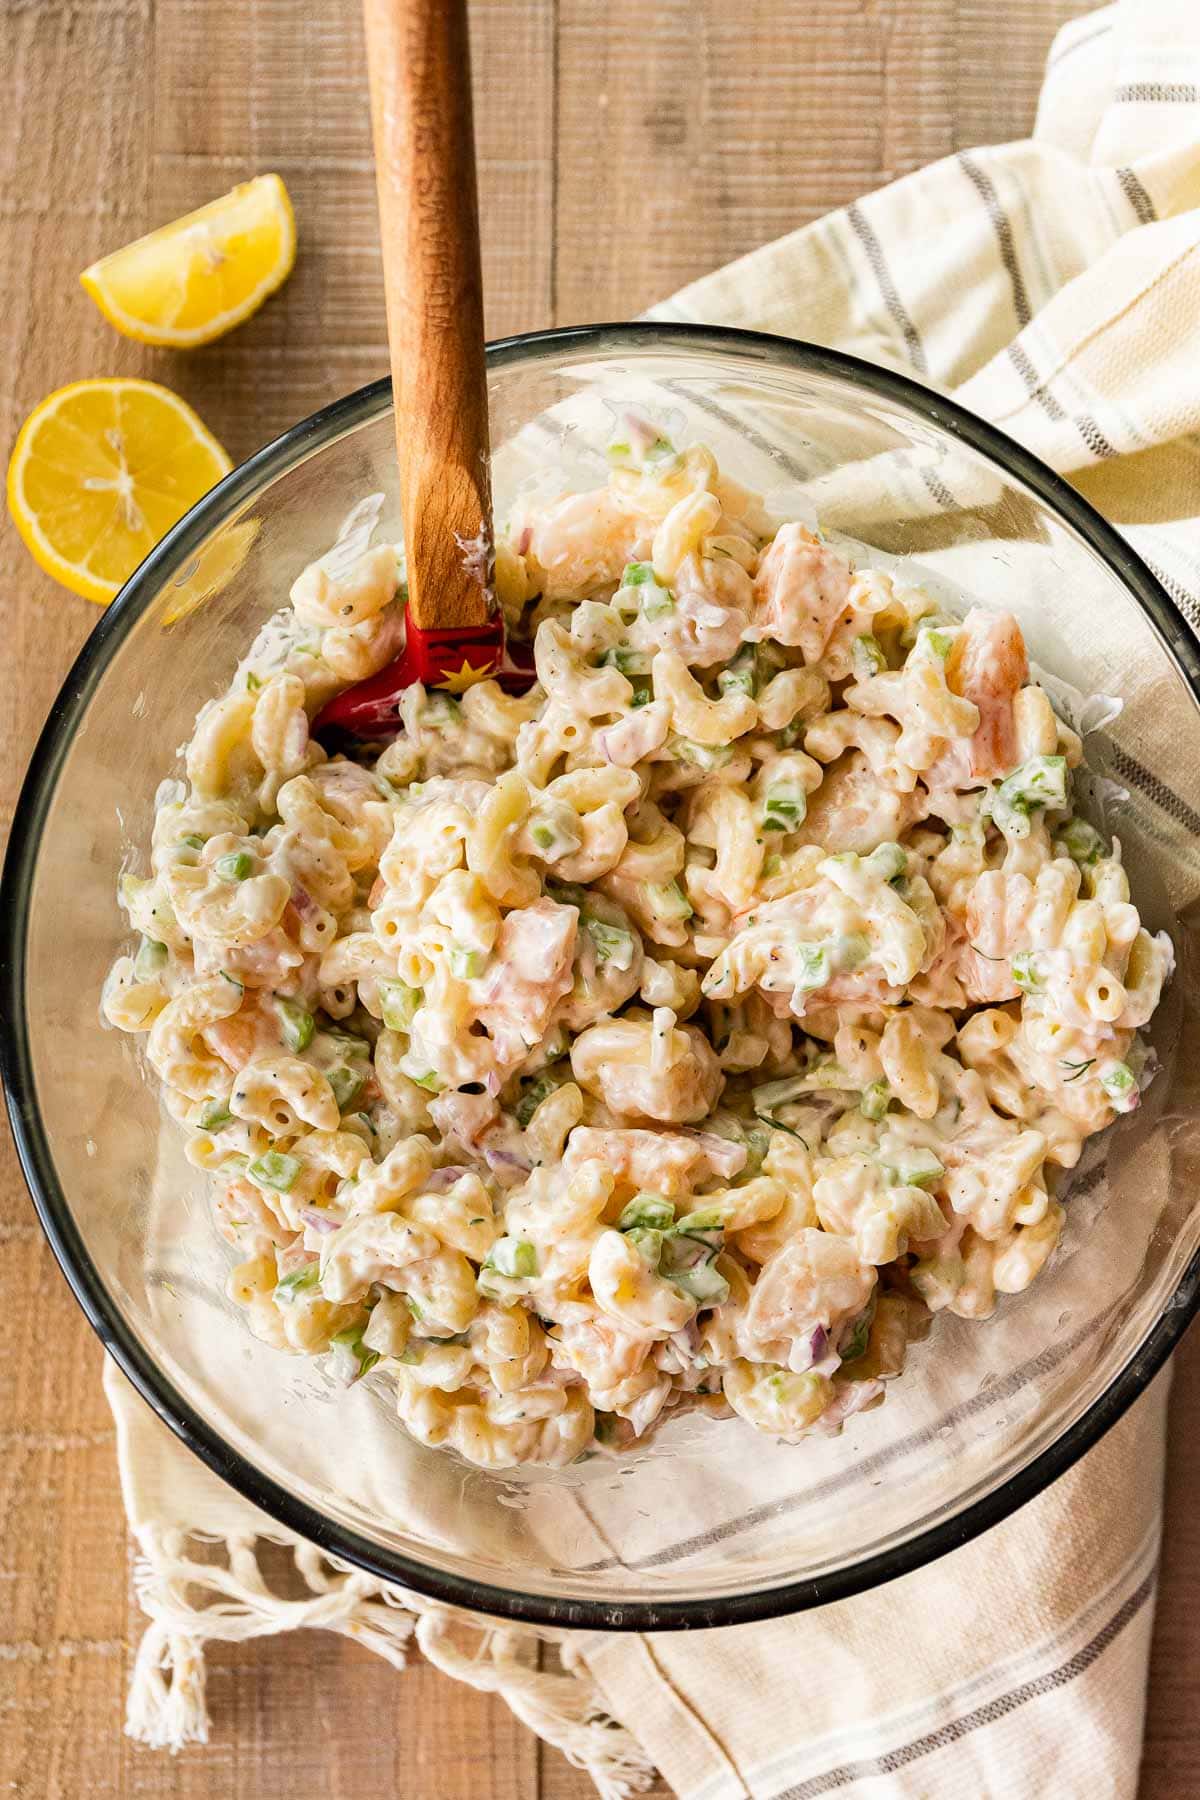 Creamy Shrimp Pasta Salad cooked shrimp all ingredients mixed together in bowl